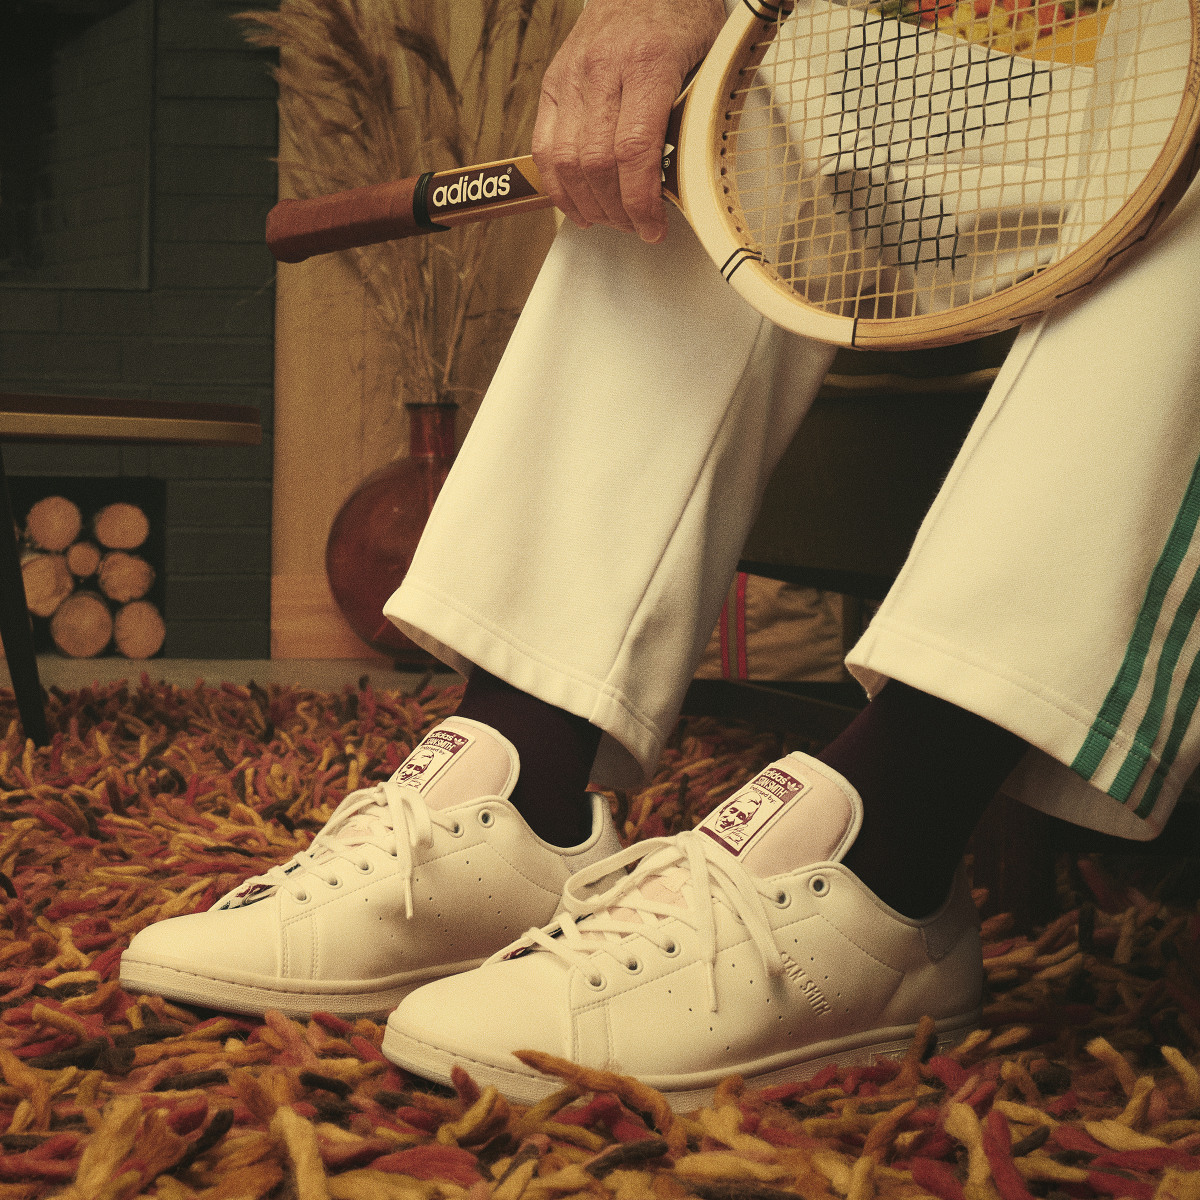 Adidas Stanniversary Stan Smith Shoes. 5